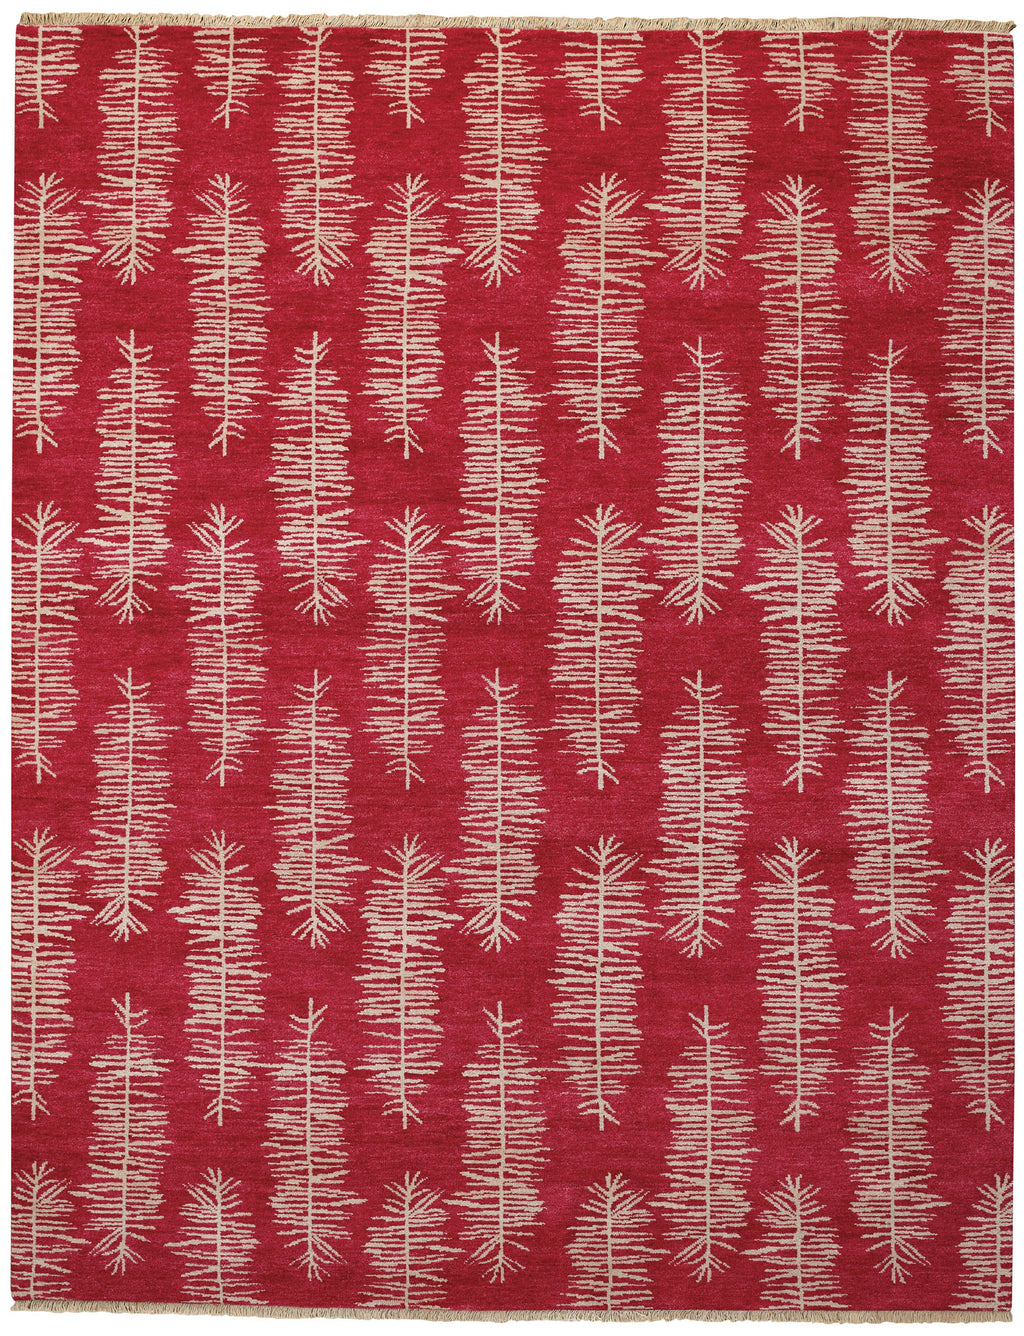 Capel Frasier 1075 Apple Red 550 Area Rug by Hable Construction main image